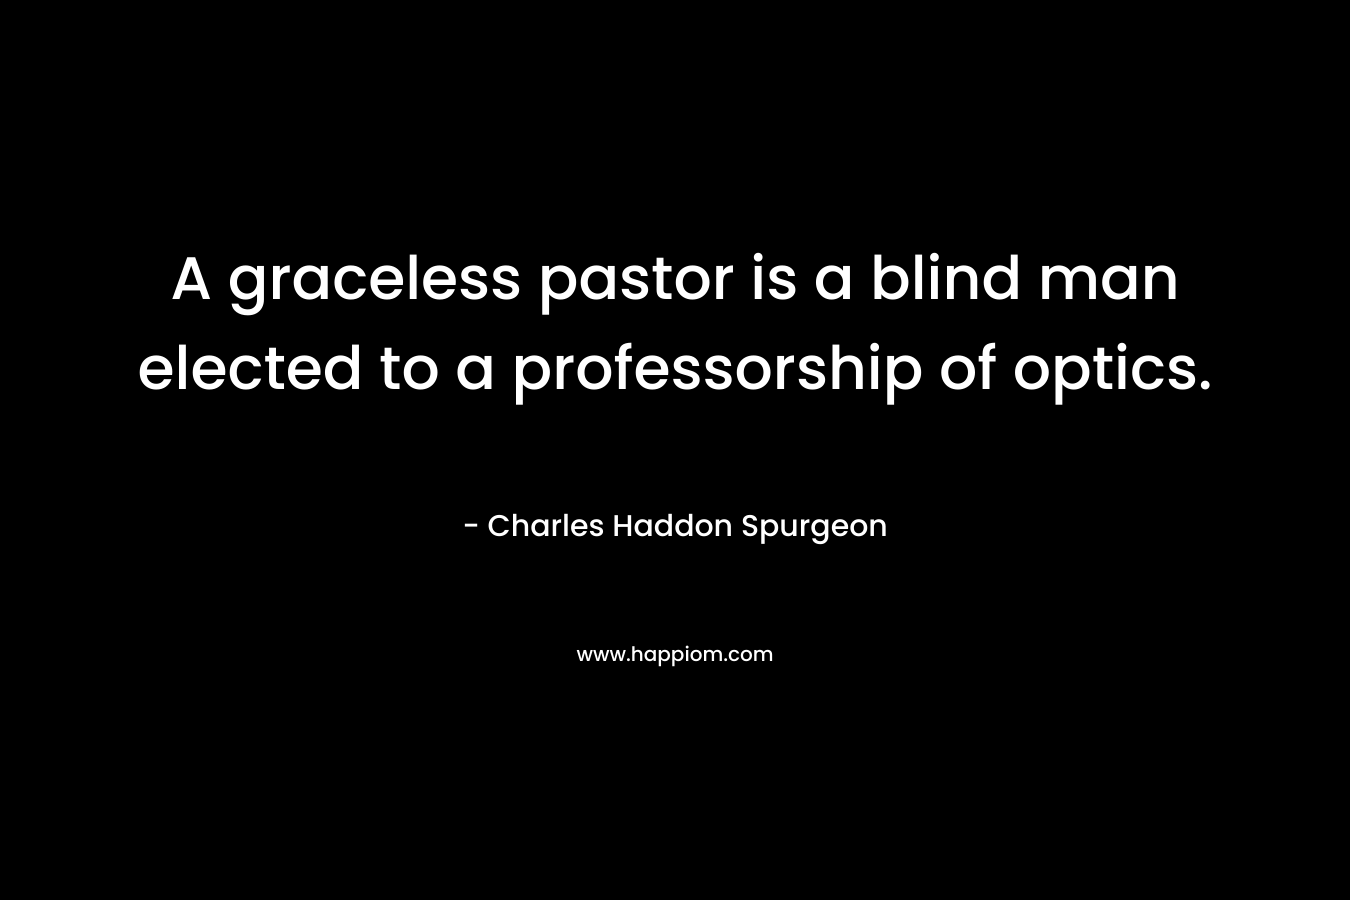 A graceless pastor is a blind man elected to a professorship of optics. – Charles Haddon Spurgeon